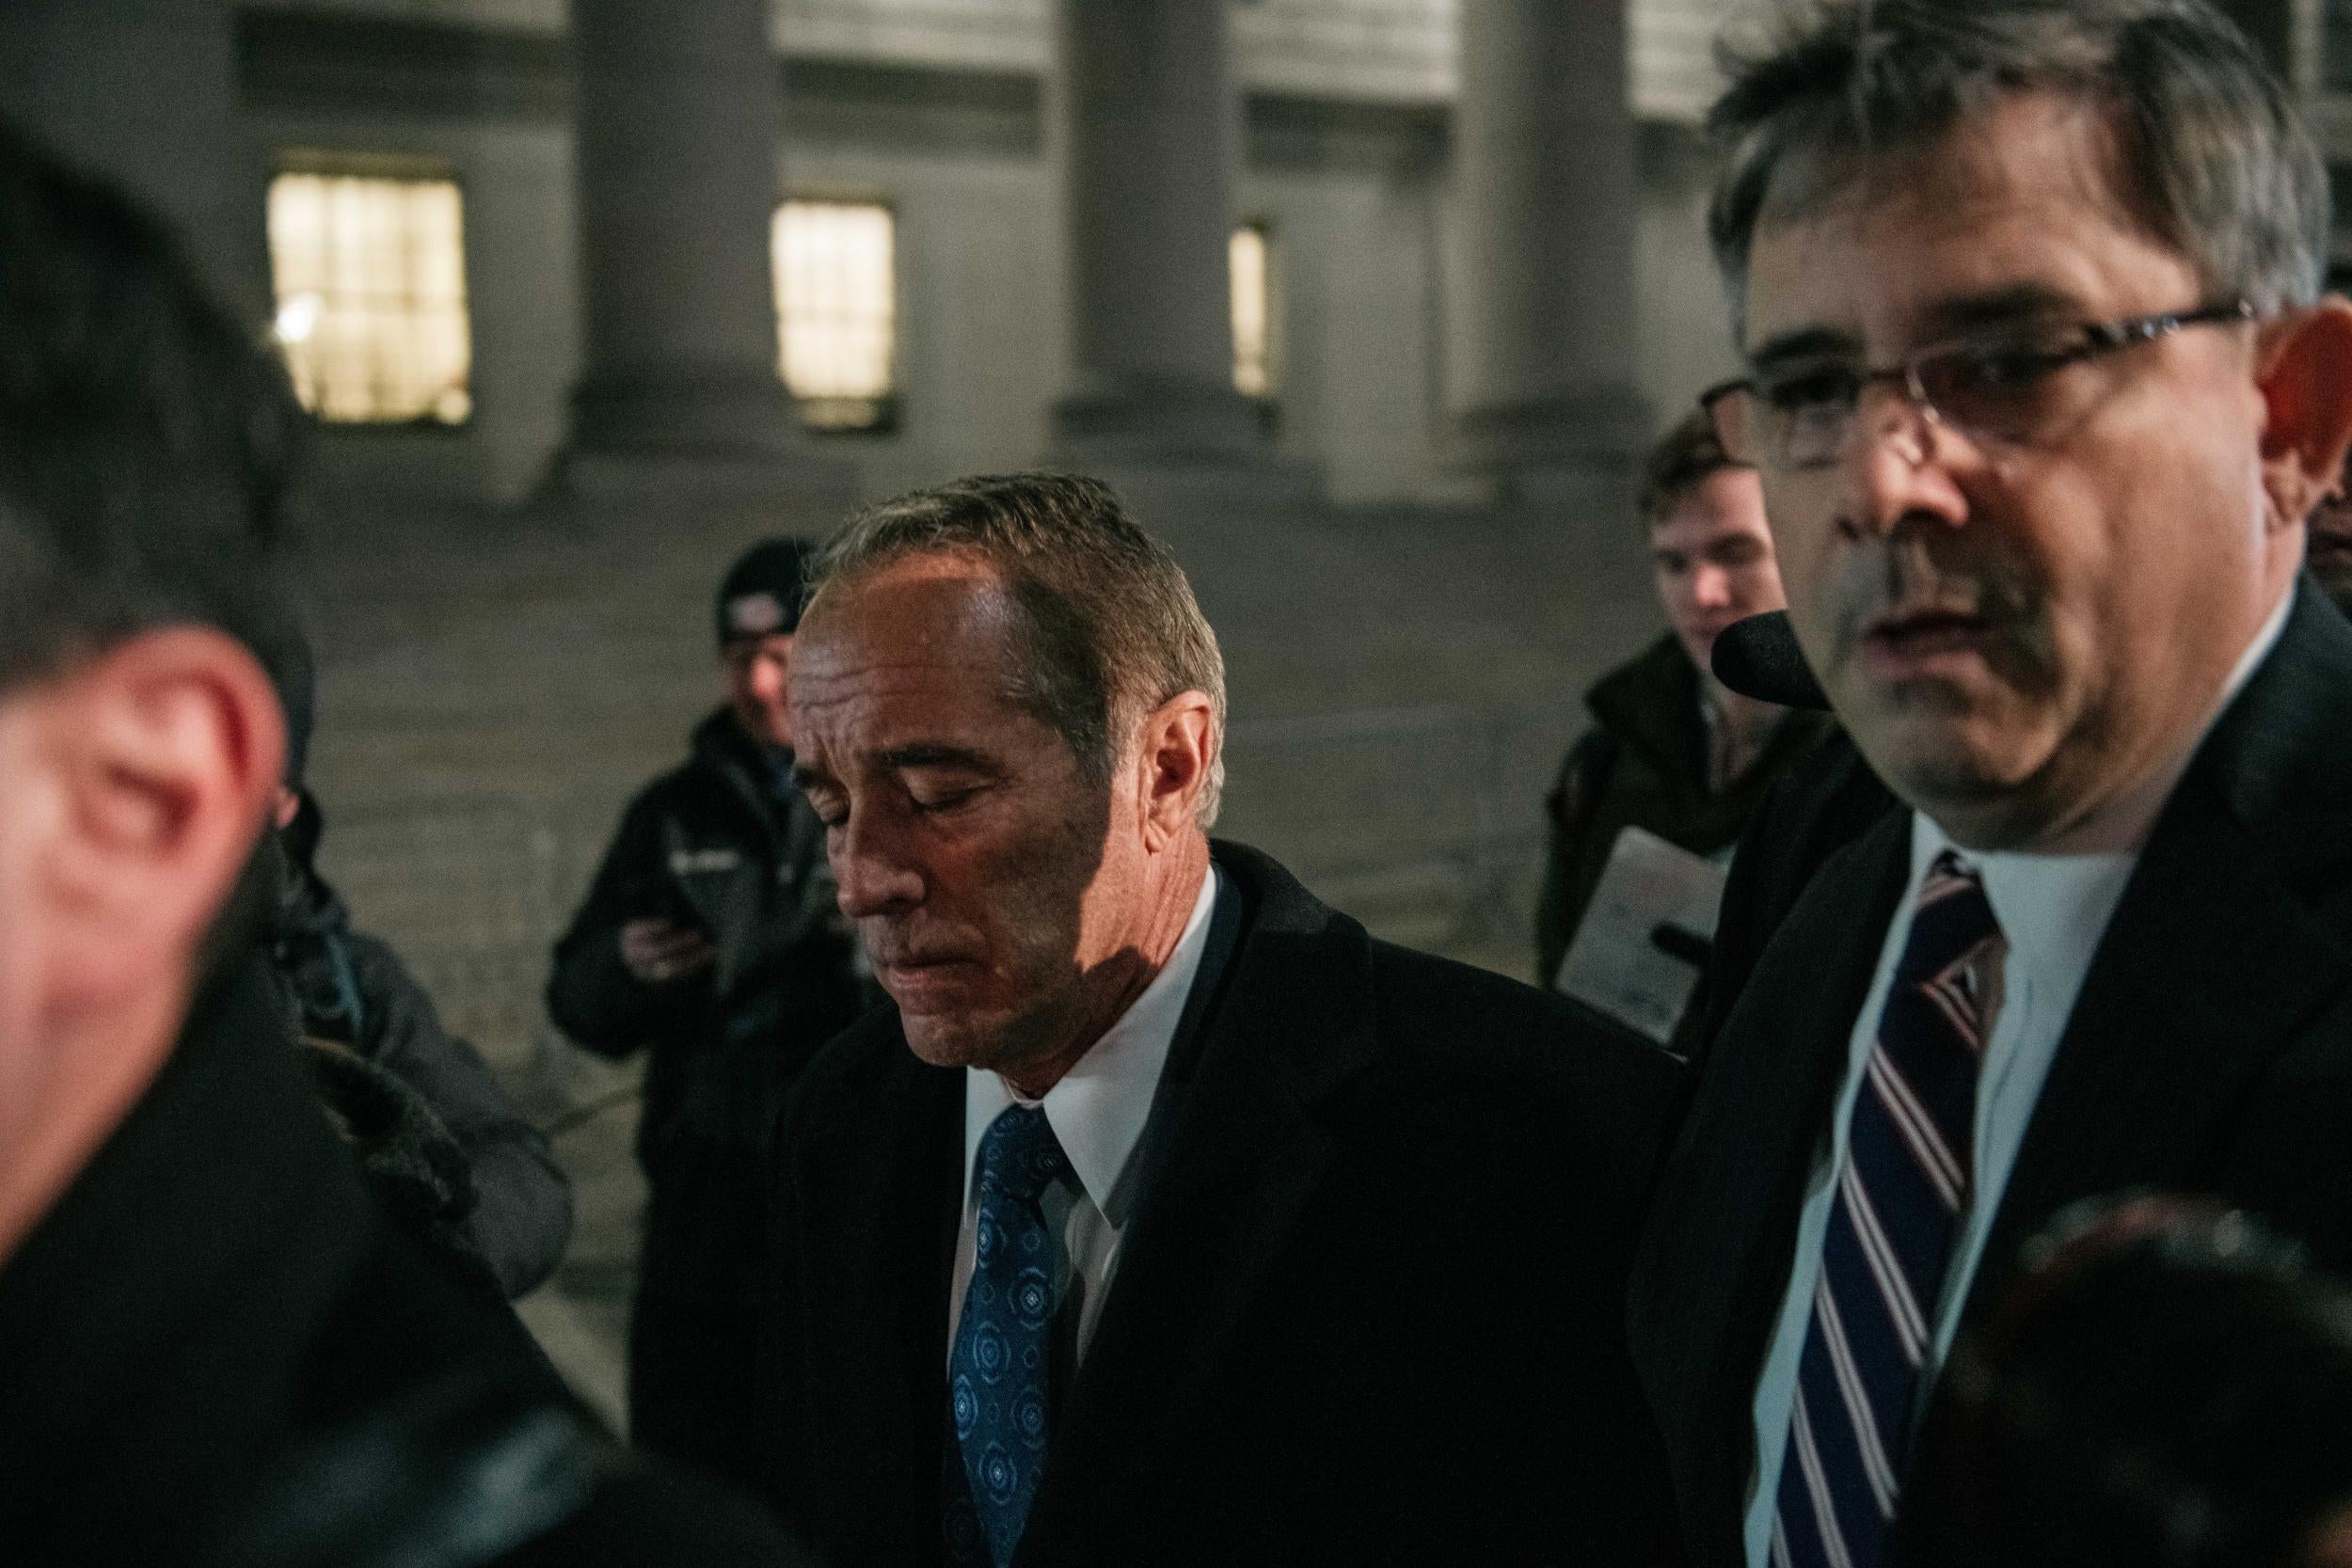 Former New York Congressman Chris Collins leaves US District Court after being sentenced to 26 months in prison